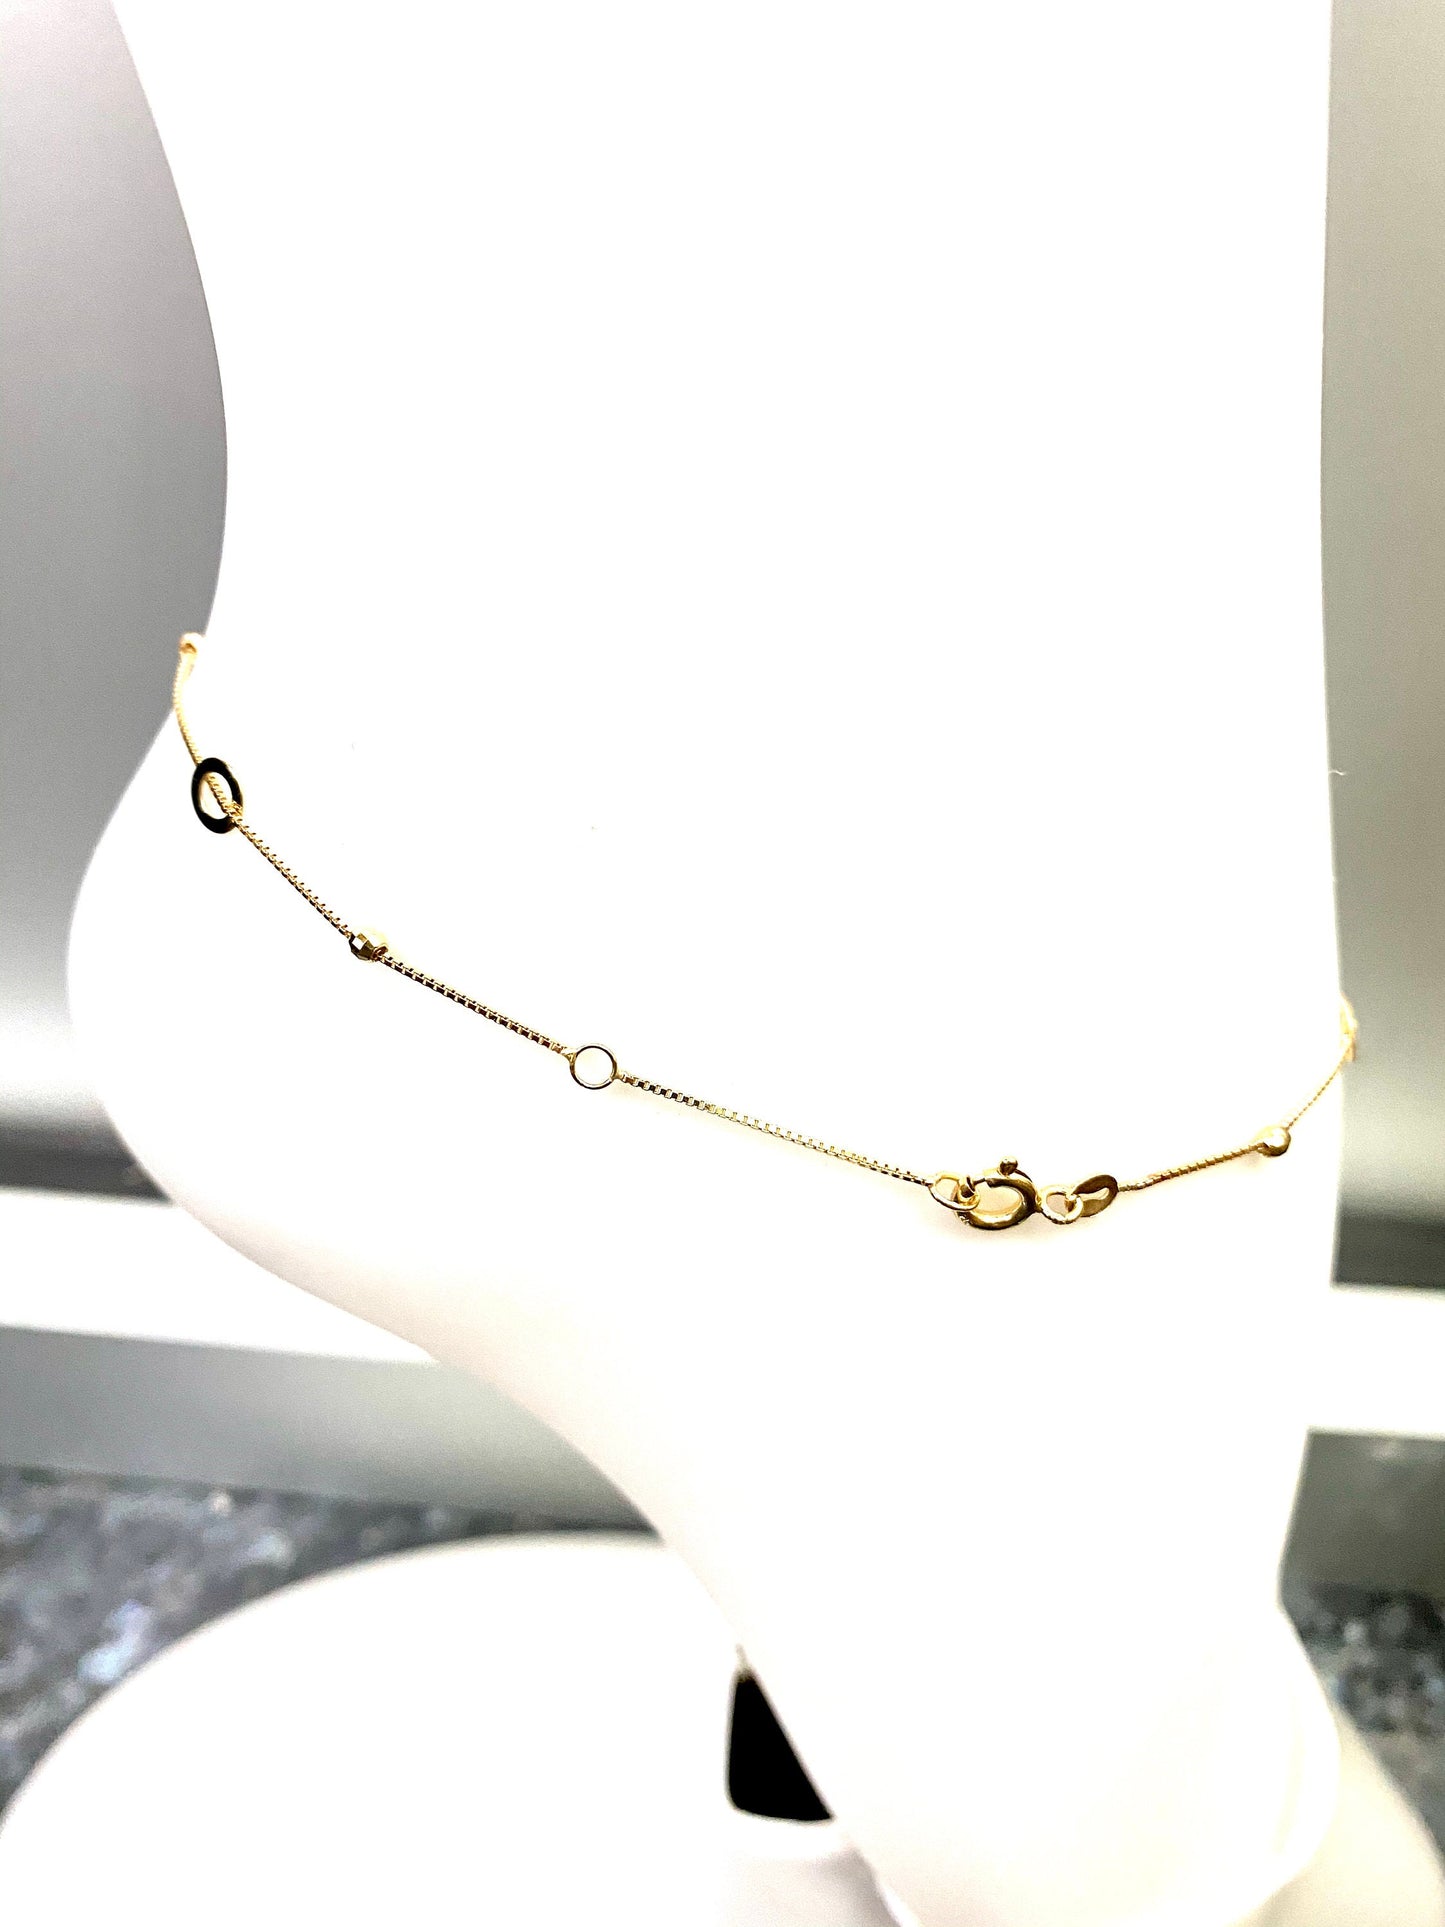 Solid Yellow gold Bead/Circle Station adjustable ANKLET BRACELET